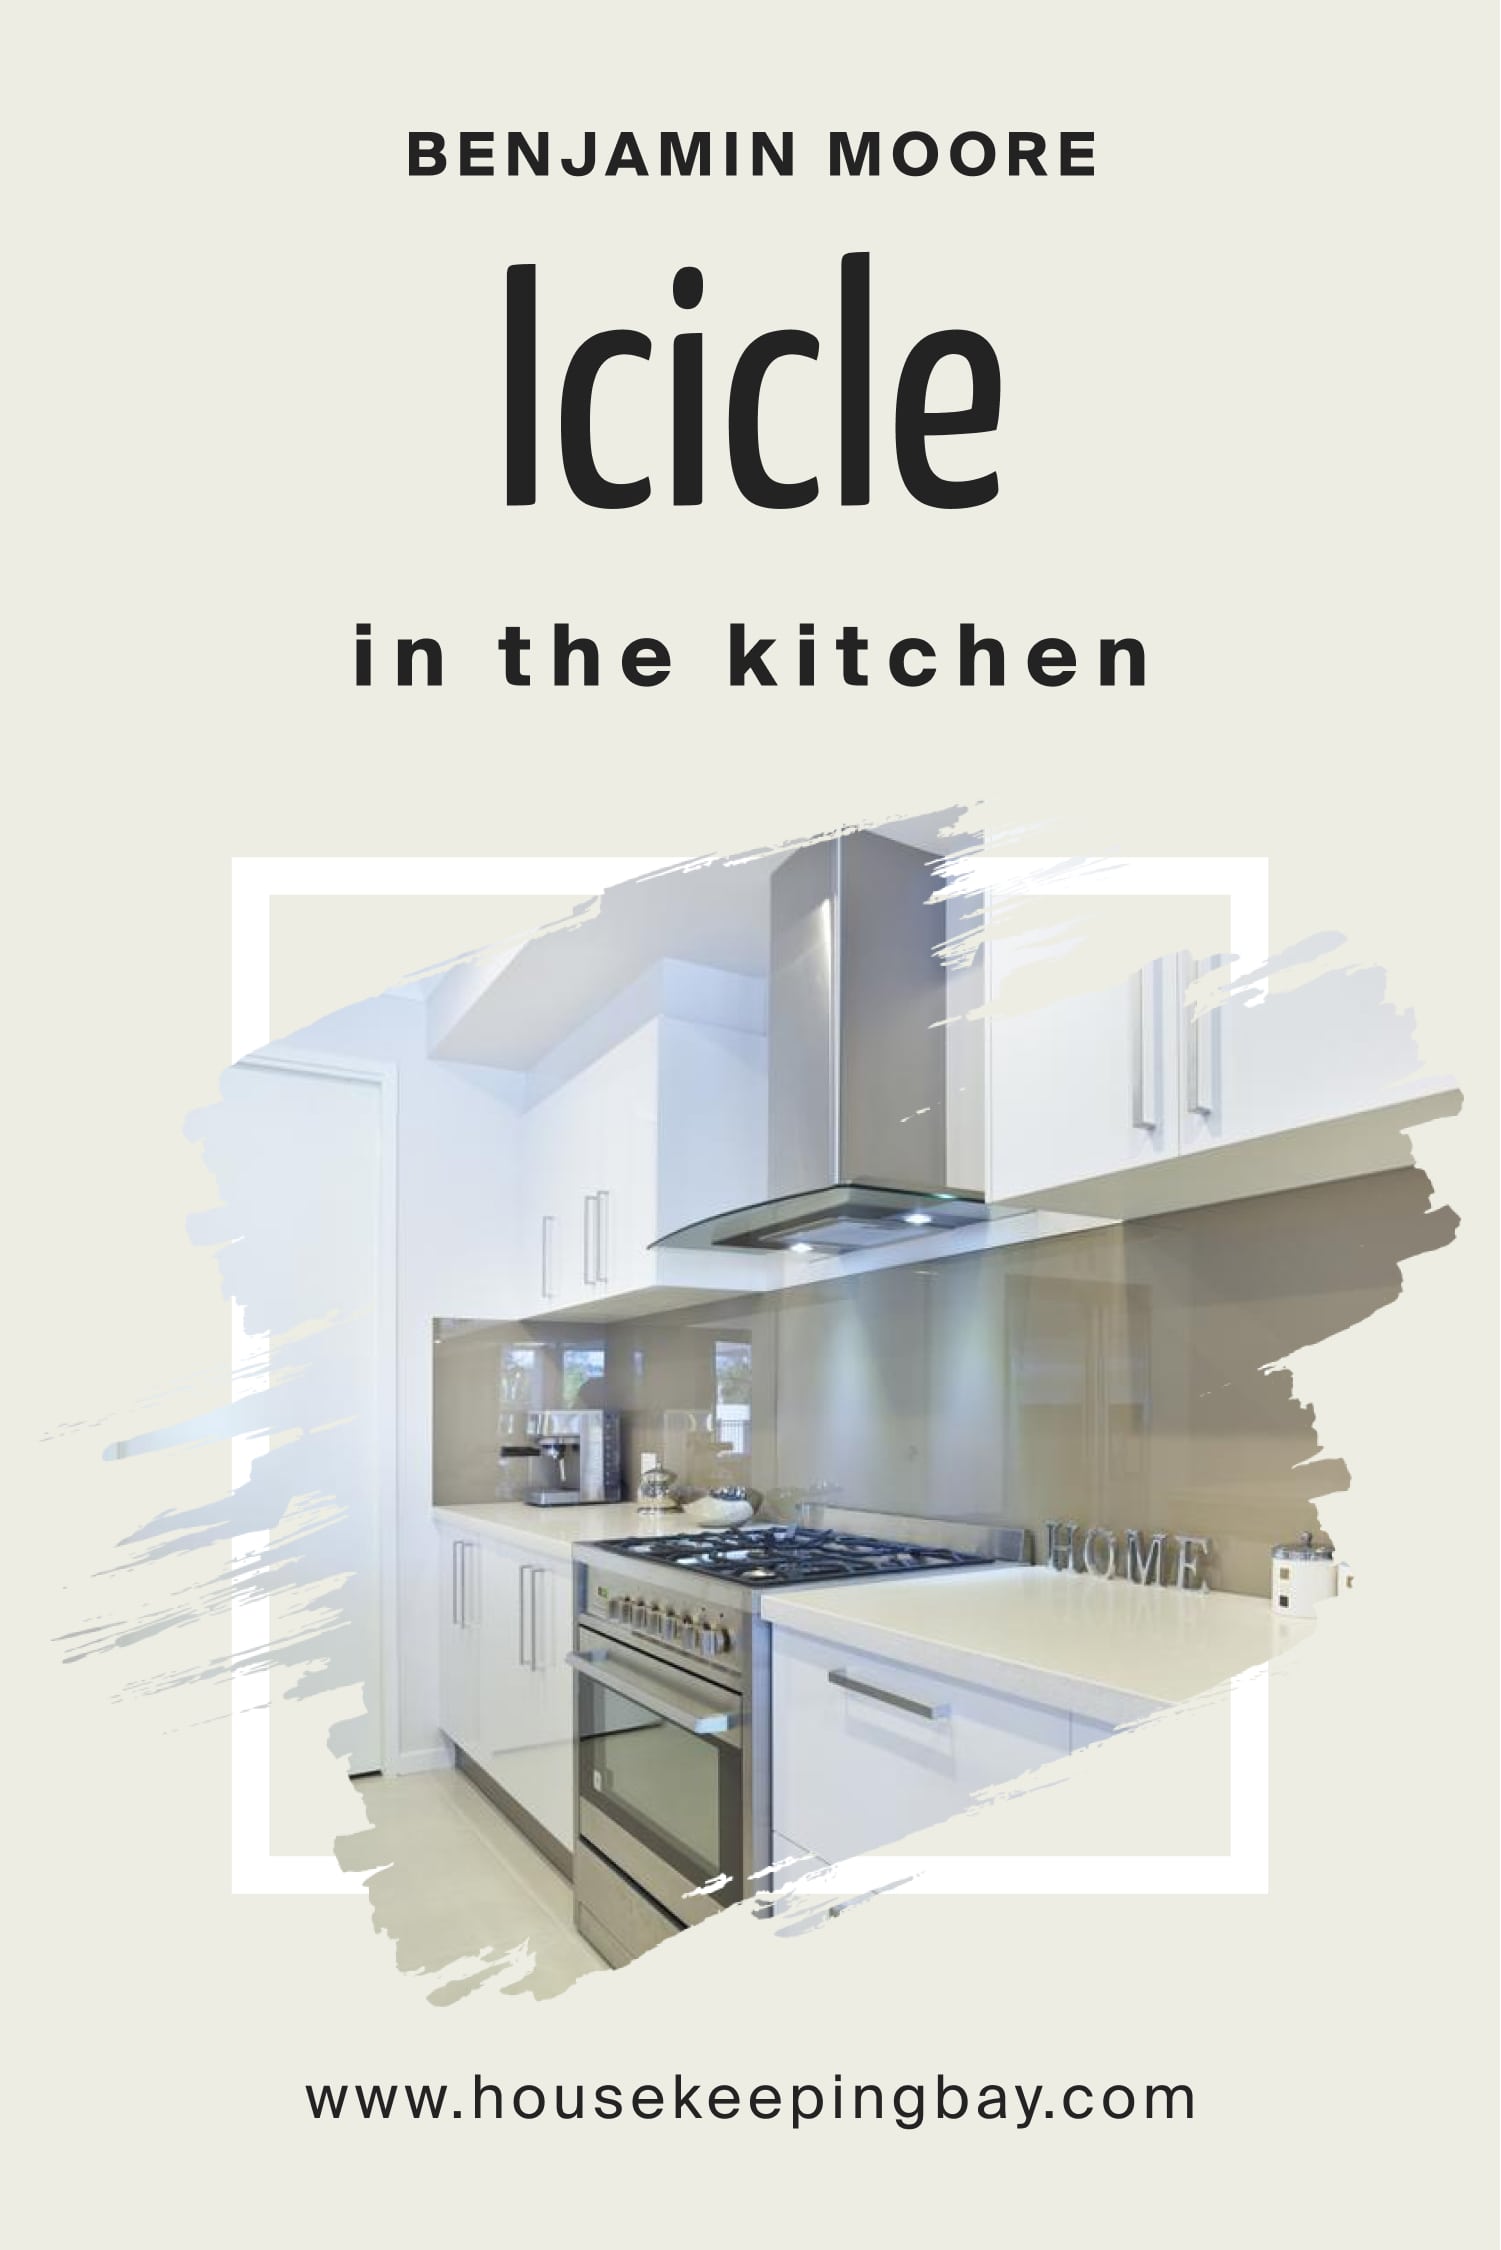 Benjamin Moore. Icicle 2142 70 for the Kitchen